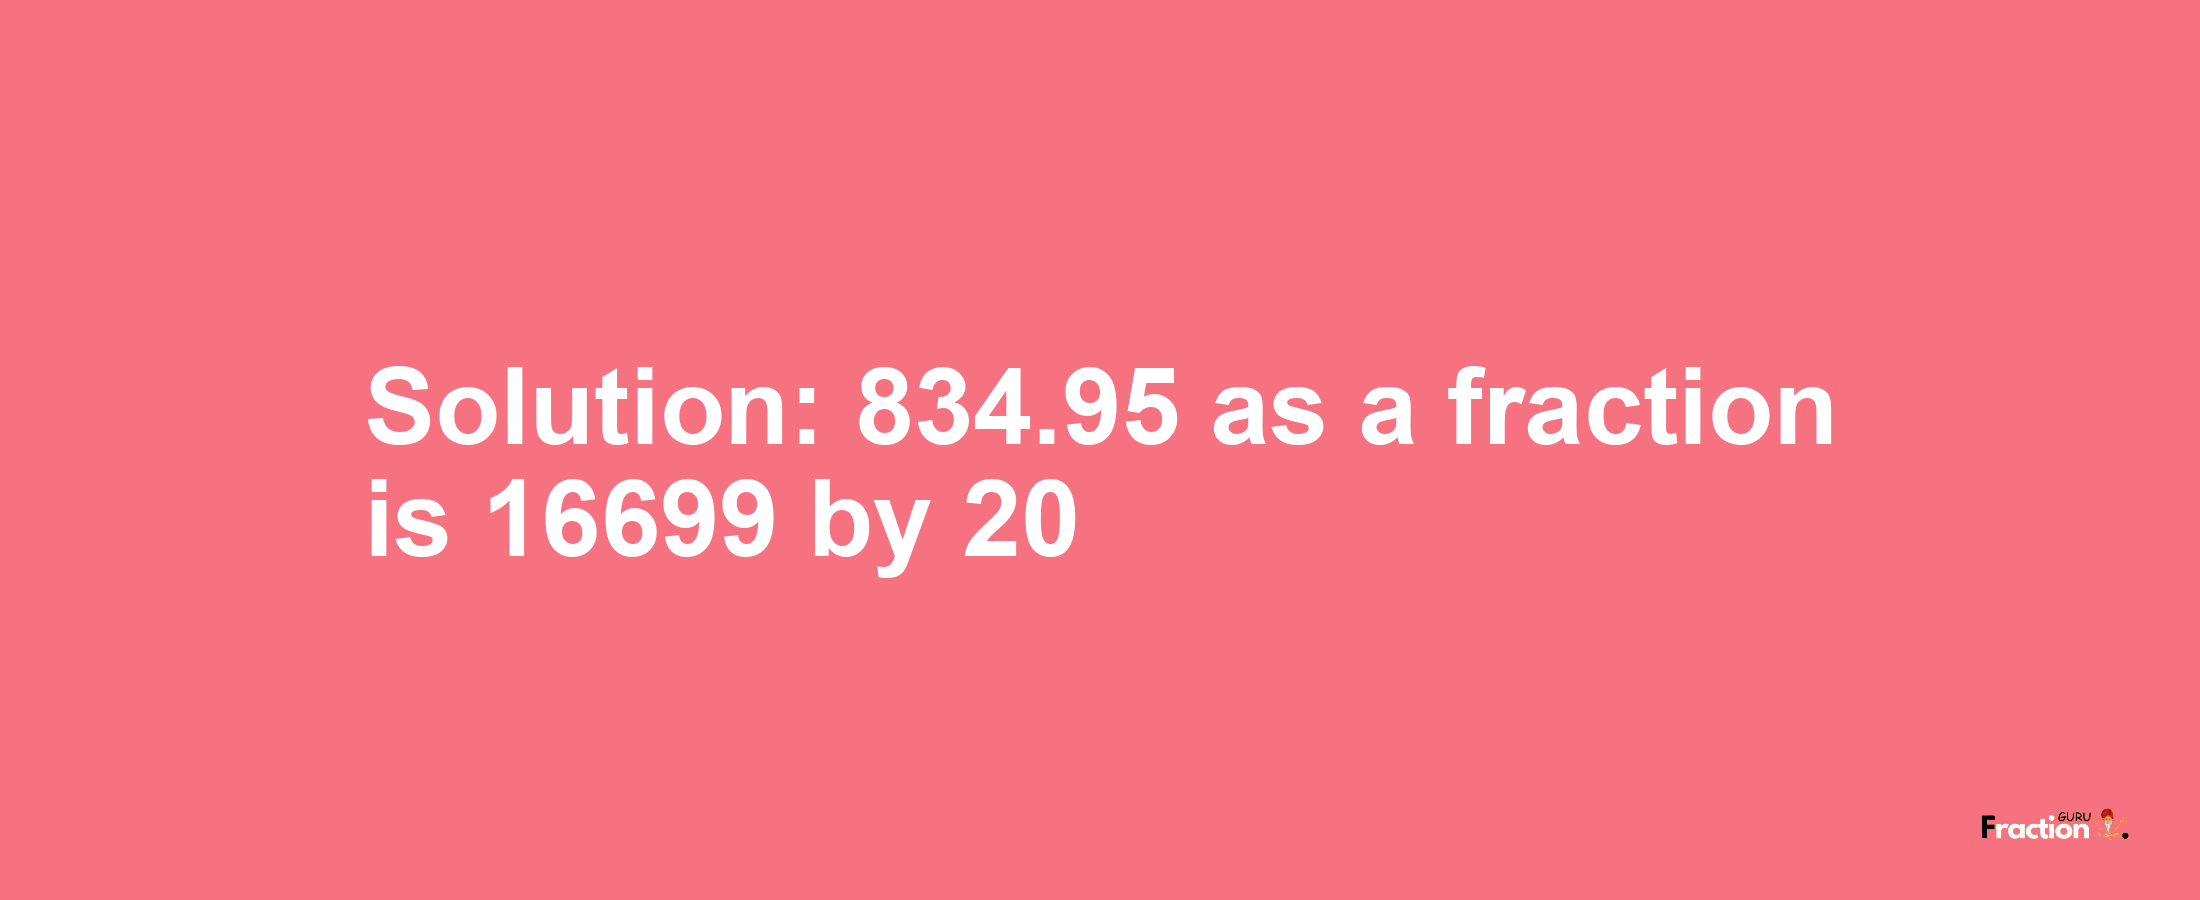 Solution:834.95 as a fraction is 16699/20